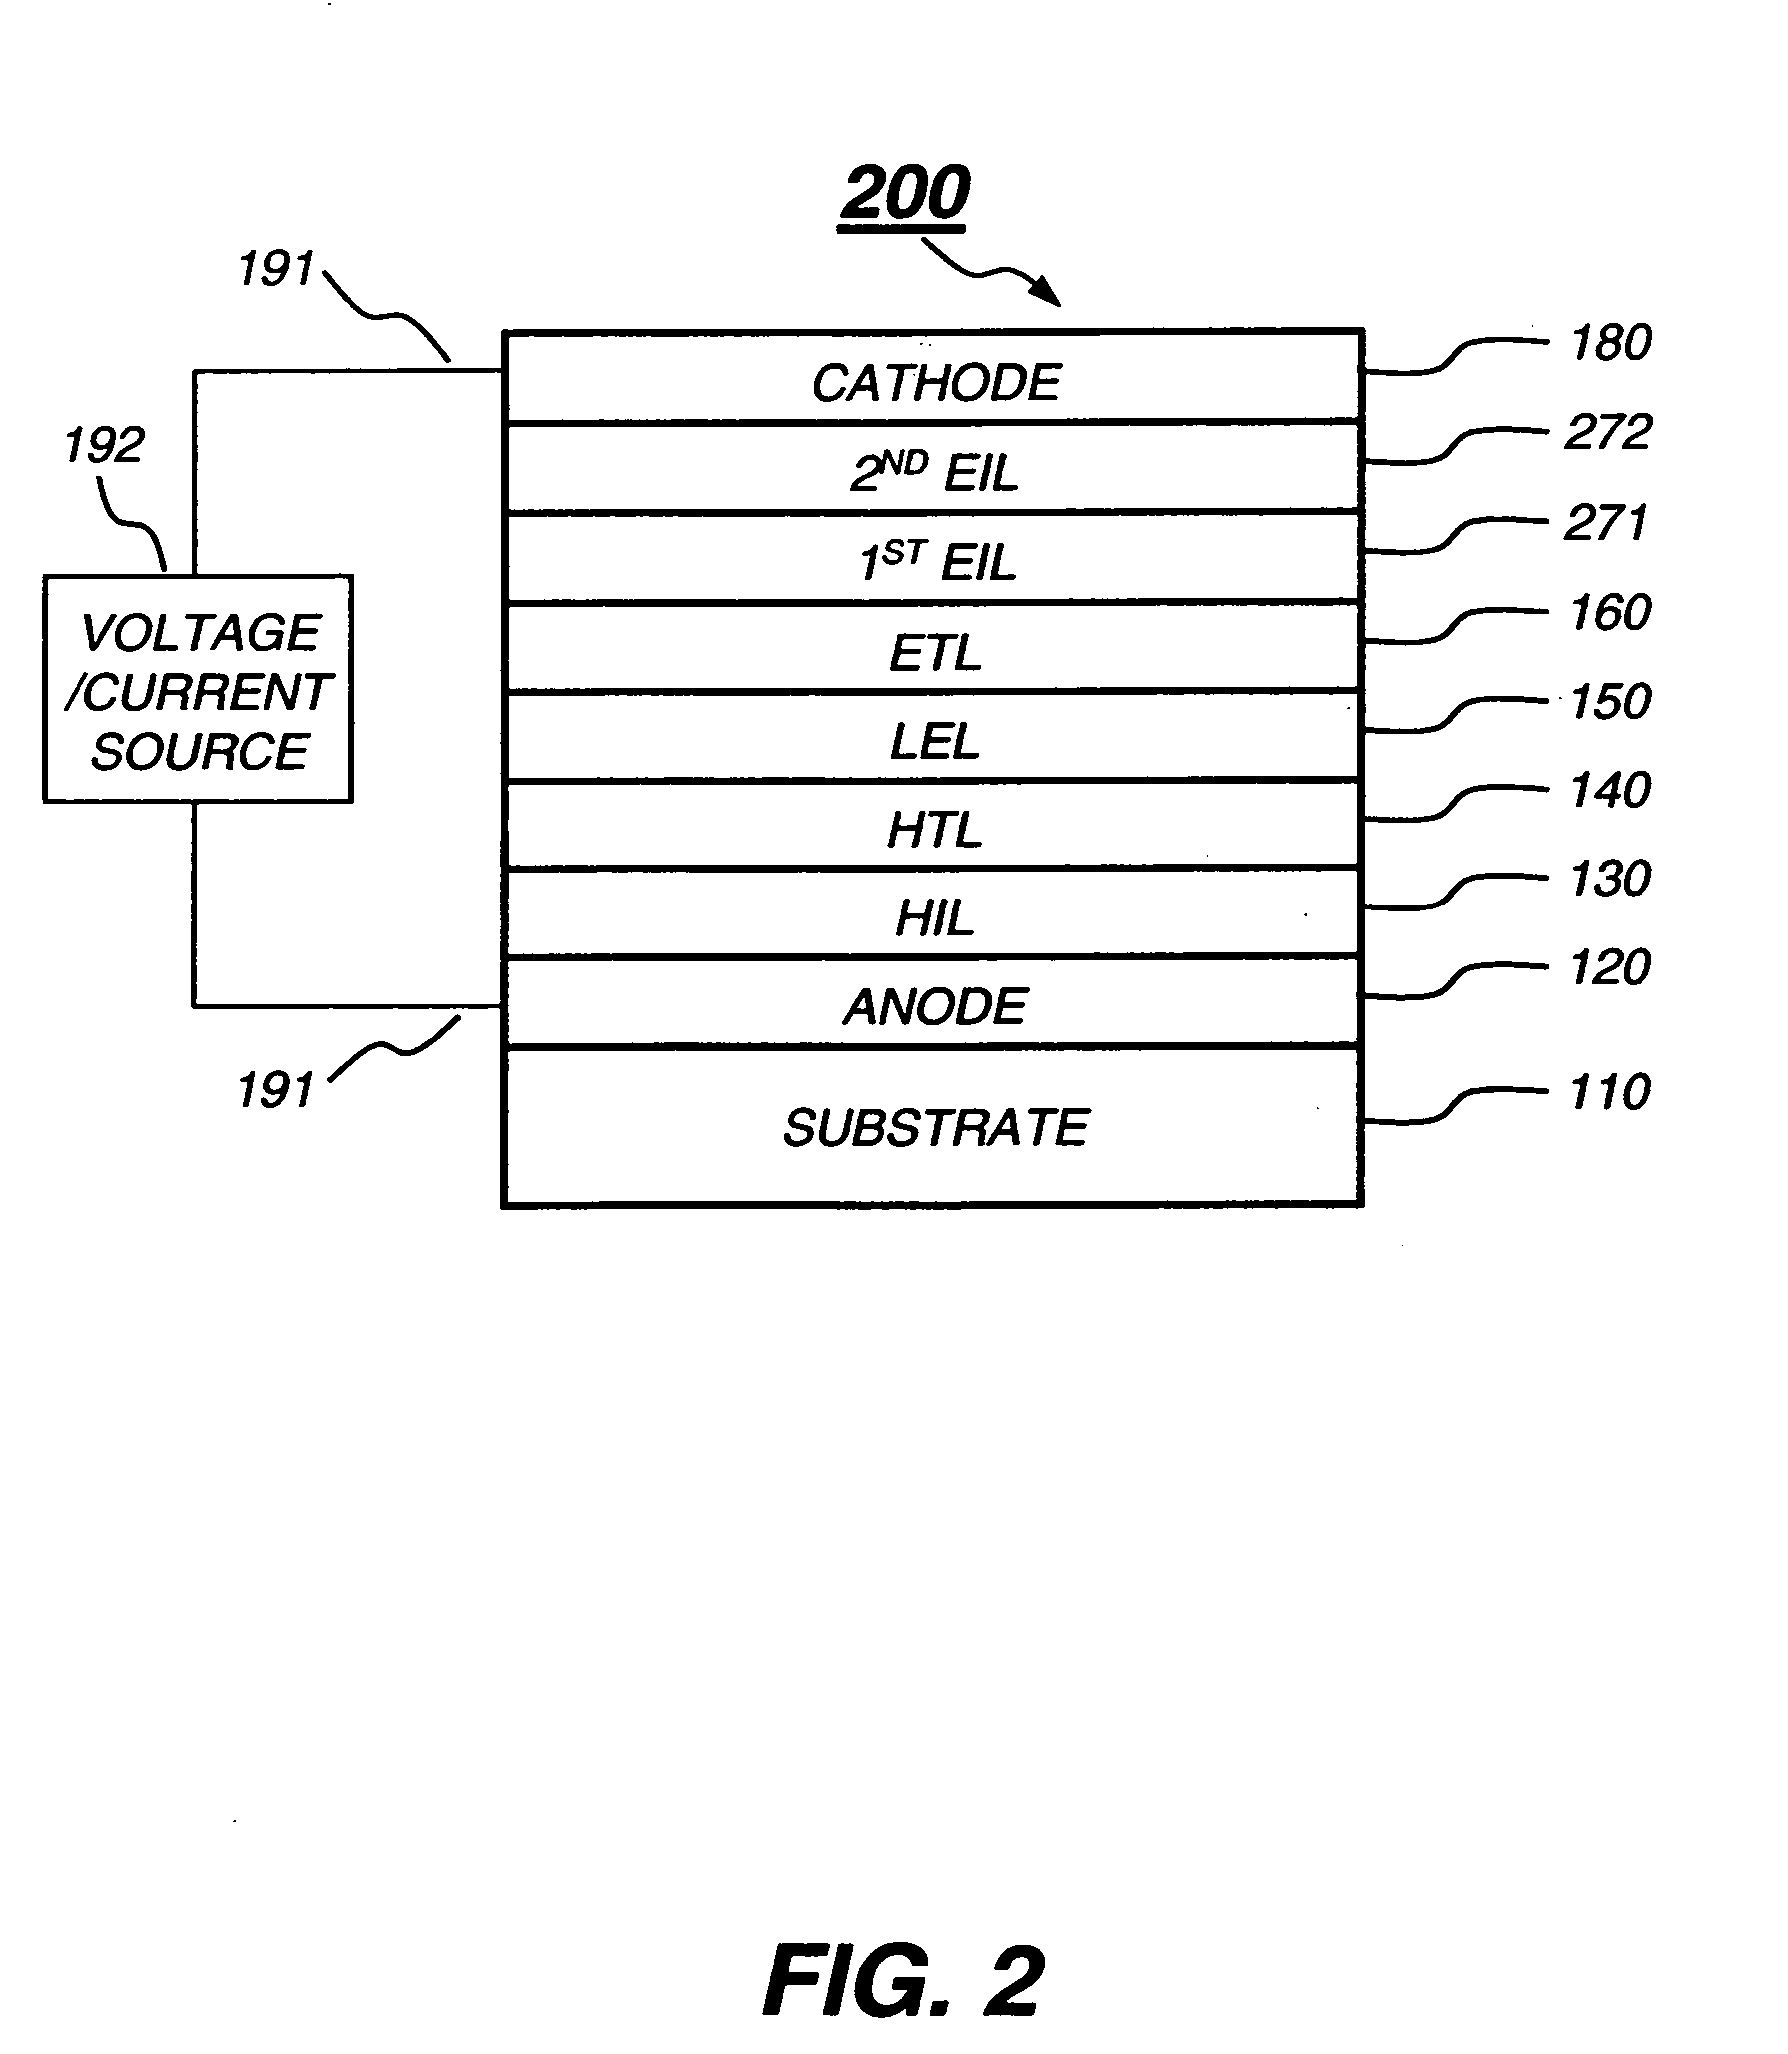 OLED electron-injecting layer